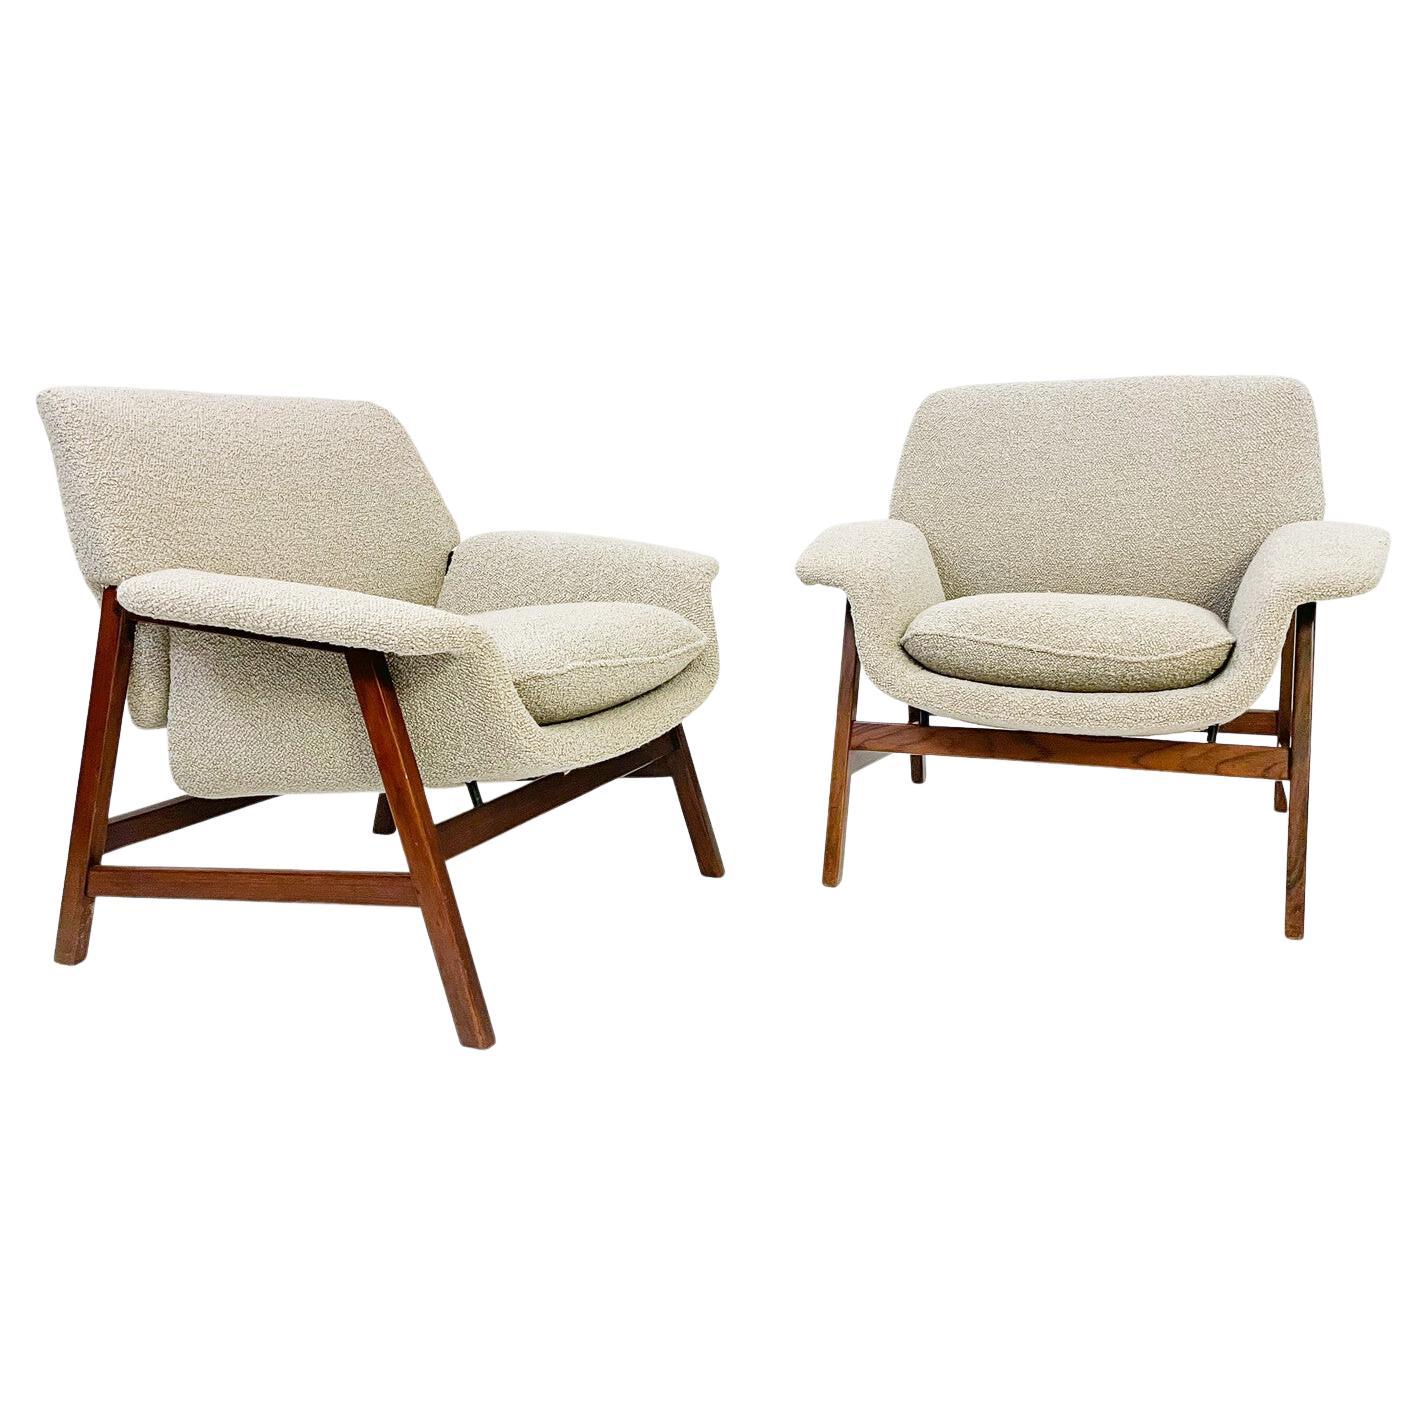 Mid-Century Modern Pair of Armchairs Model "849" by Gianfranco Frattini